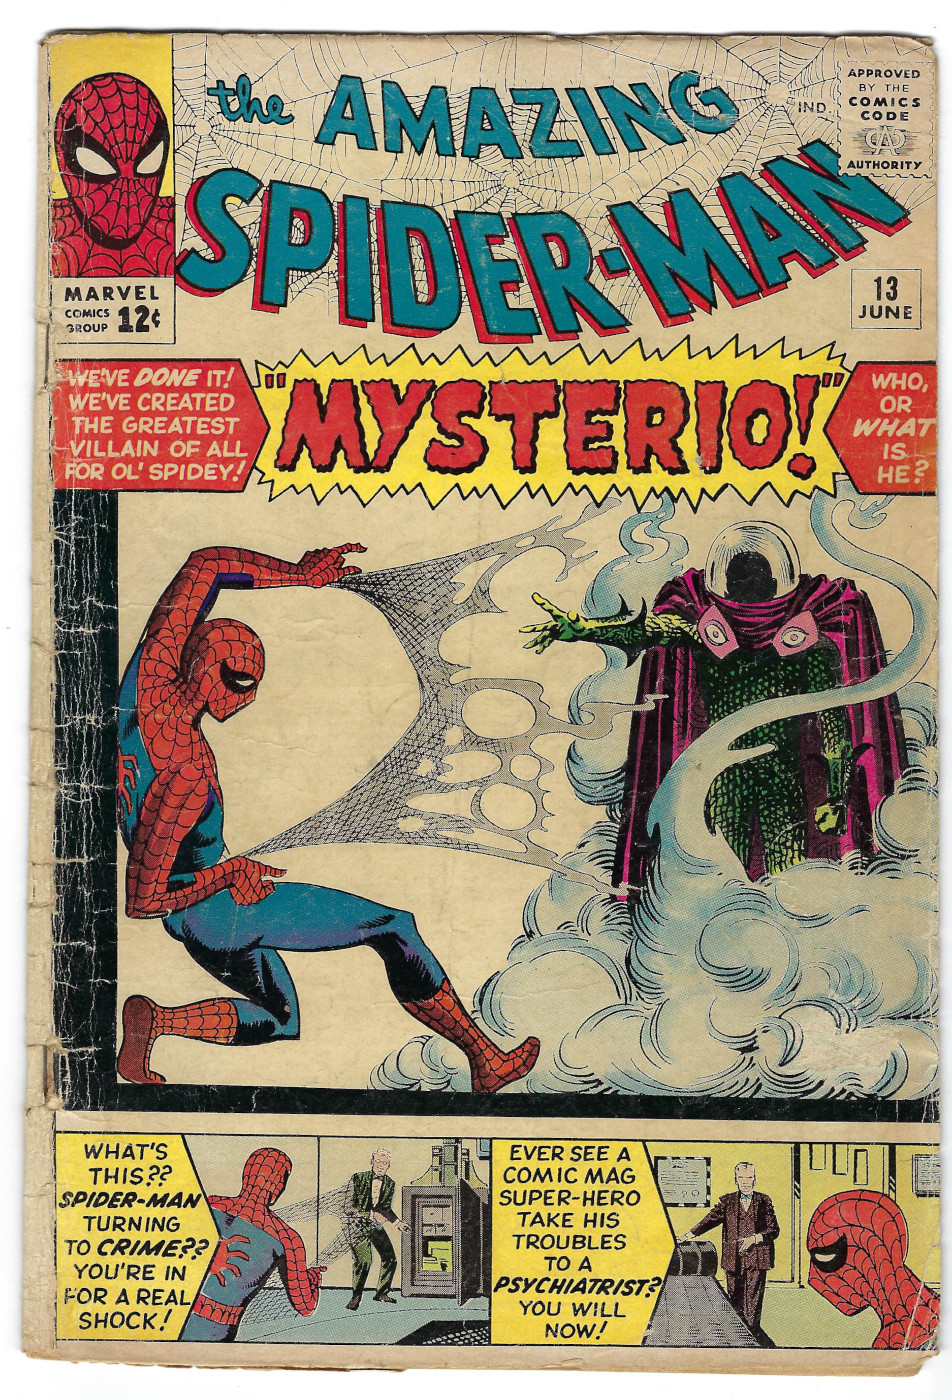 Marvel Comics Amazing Spider-Man (1963) #13: 1st Appearance of Mysterio